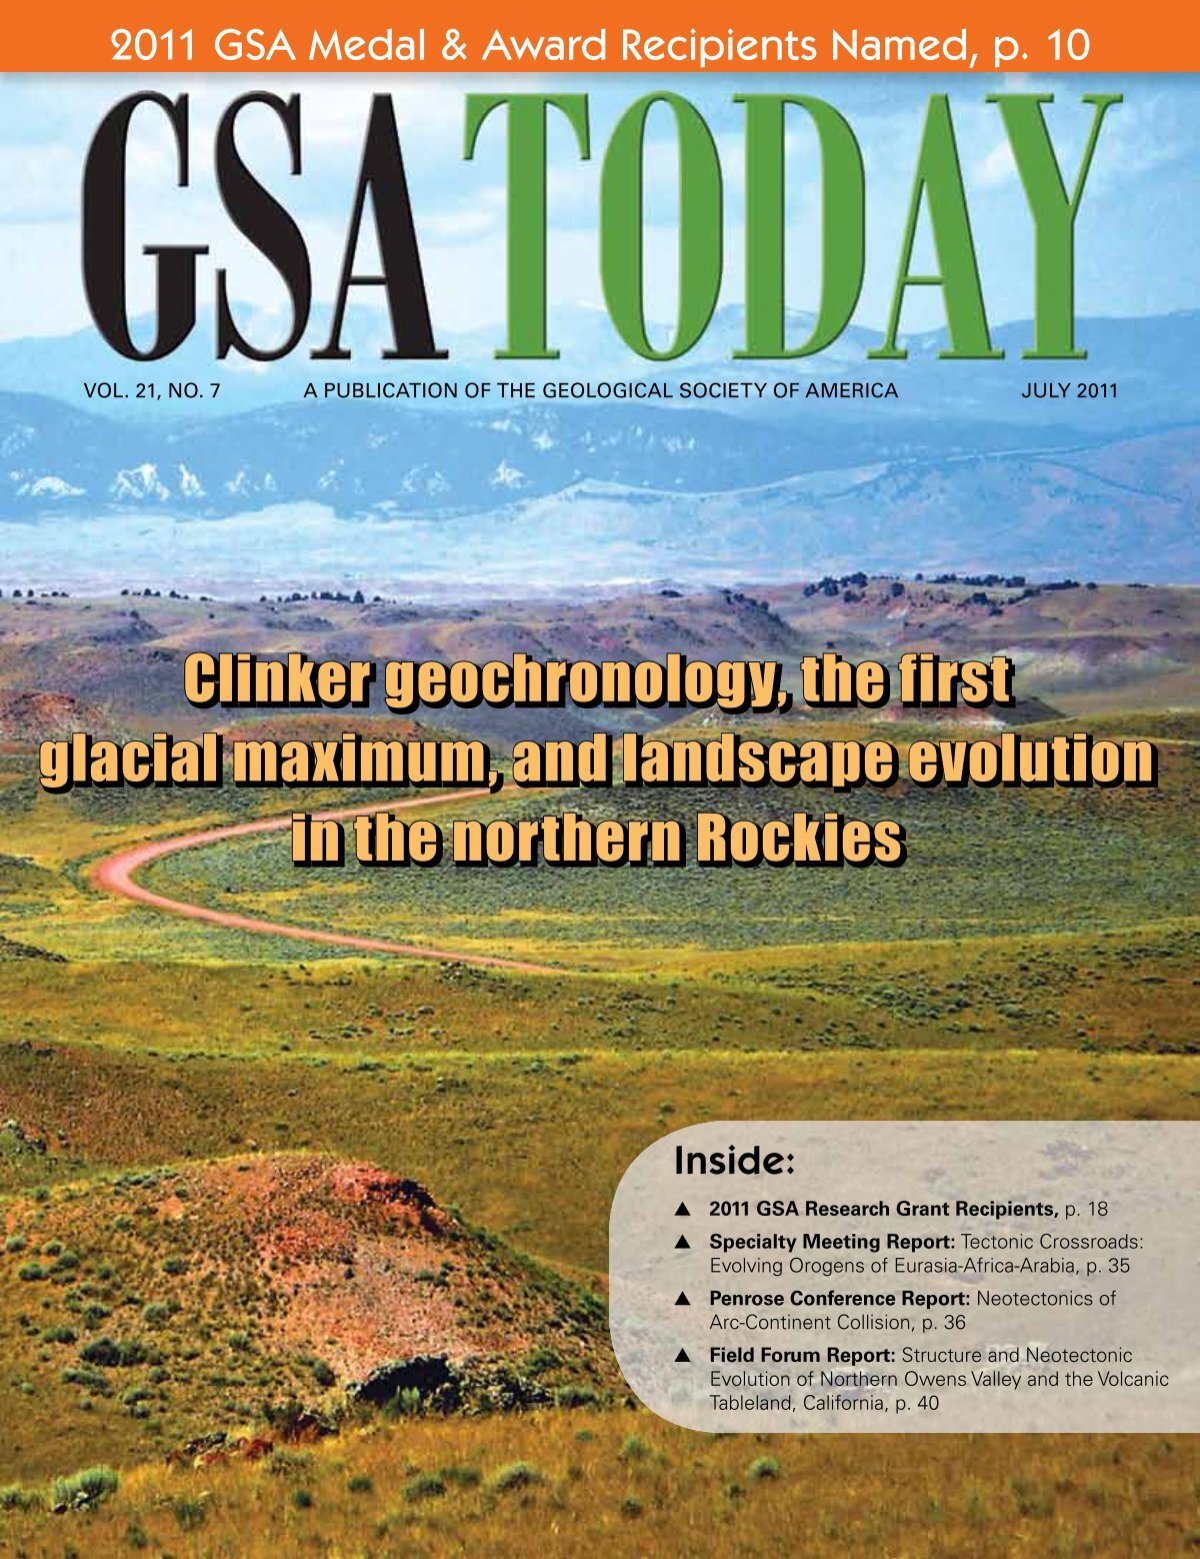 Clinker geochronology, the first glacial maximum, and landscape